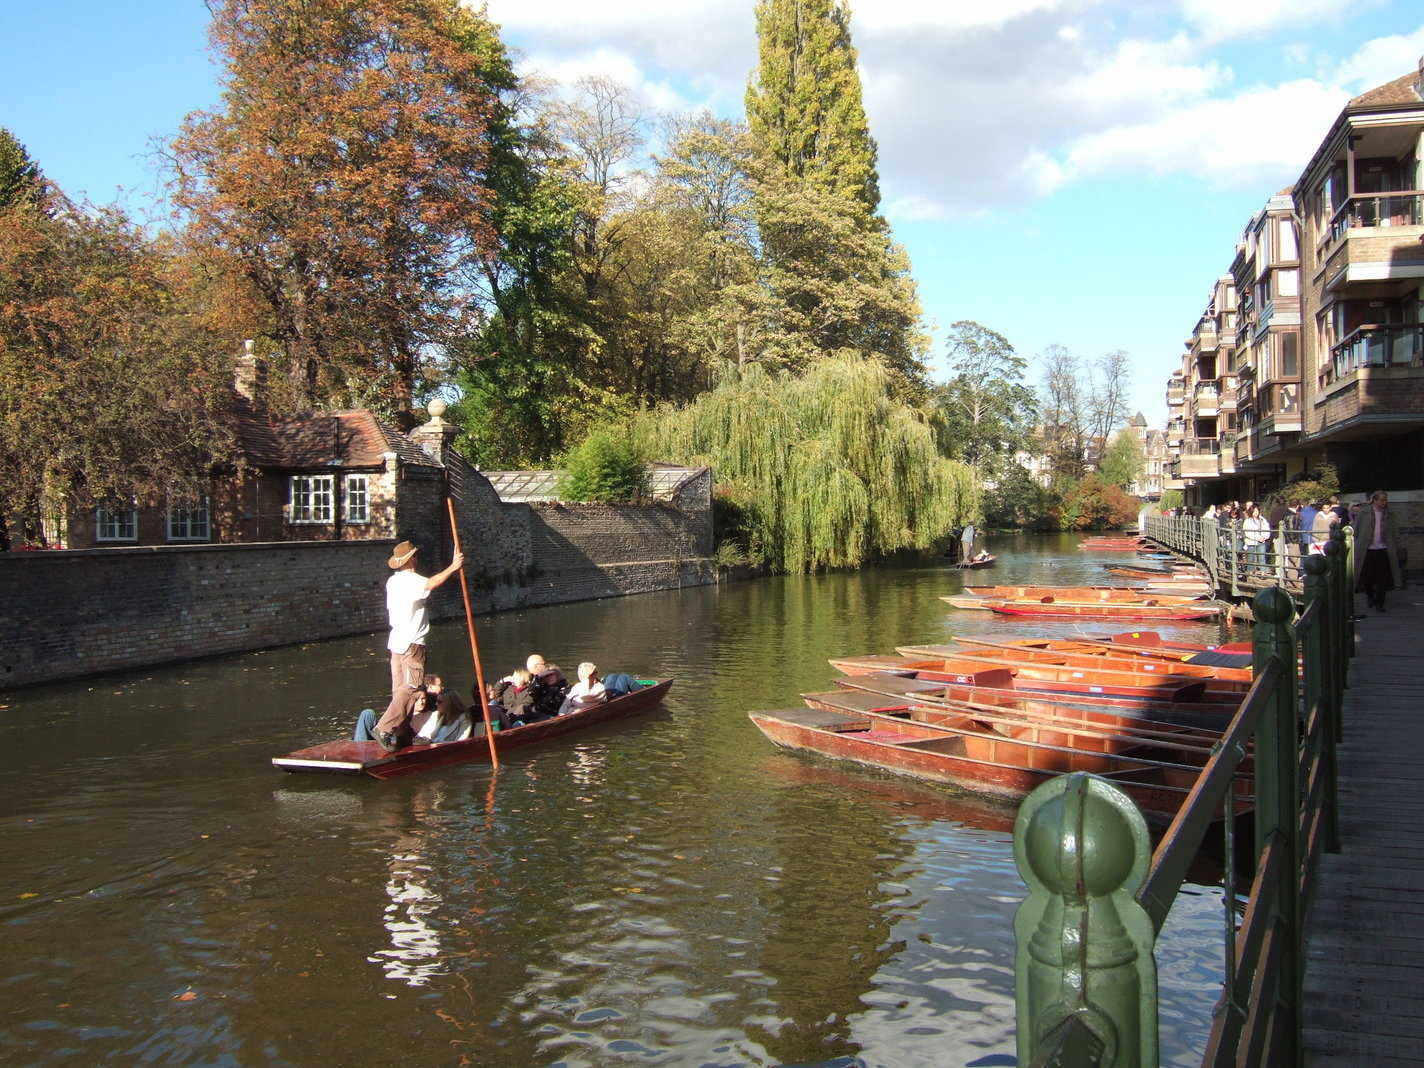 Punting - Activities, Punt | River | Water | Activity | Relax | UK